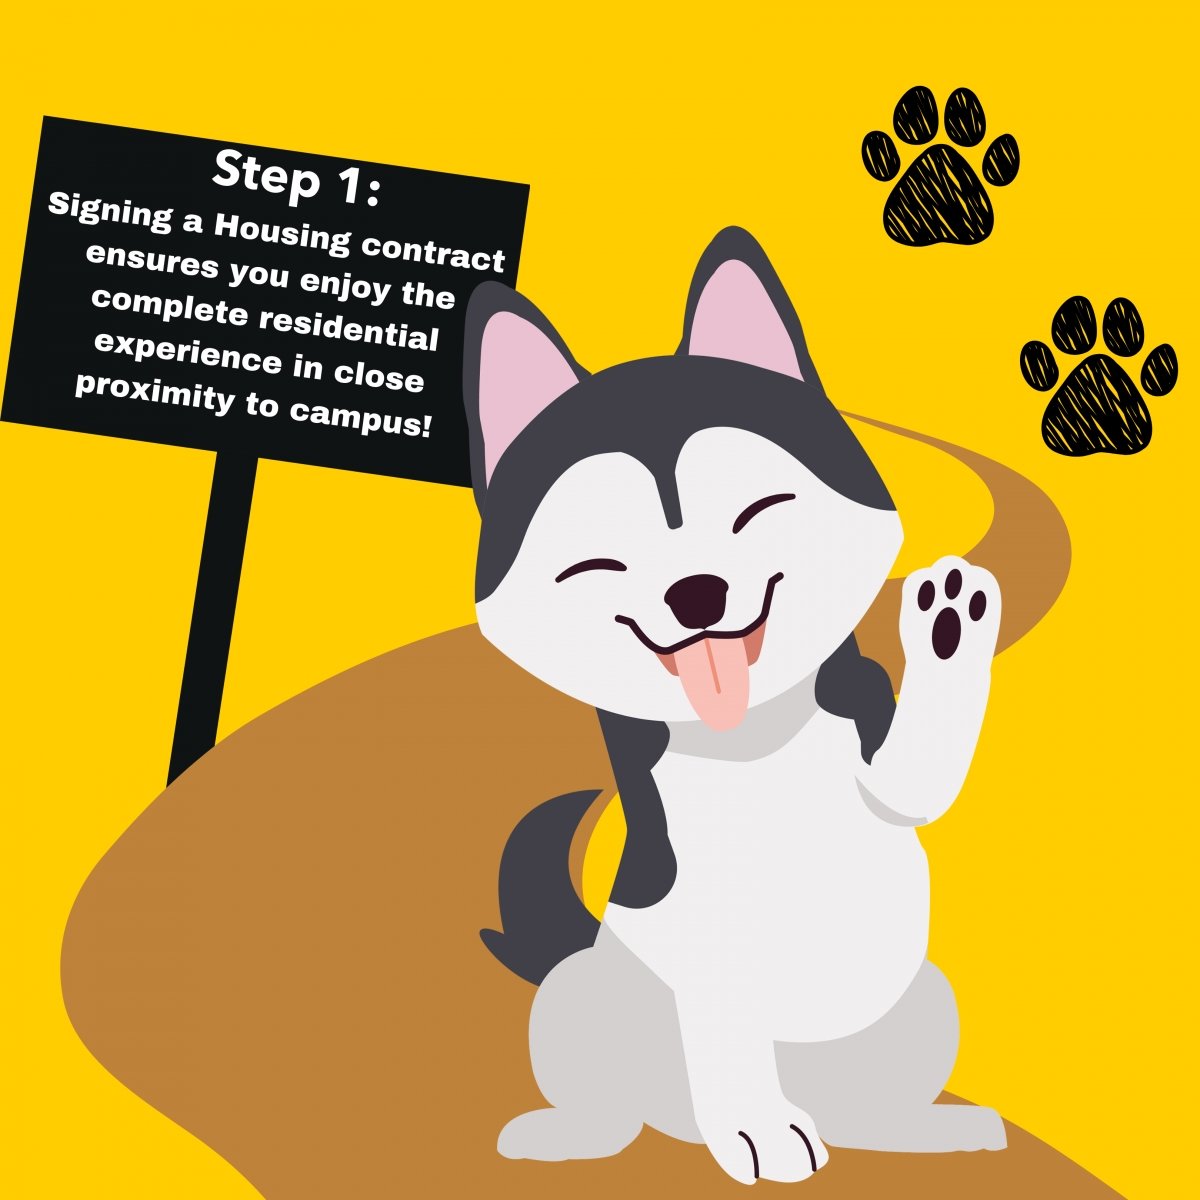 Step 1: Signing a Housing contract ensures you enjoy the complete residential experience in close proximity to campus! Cartoon husky waves on trail with sign behind it.